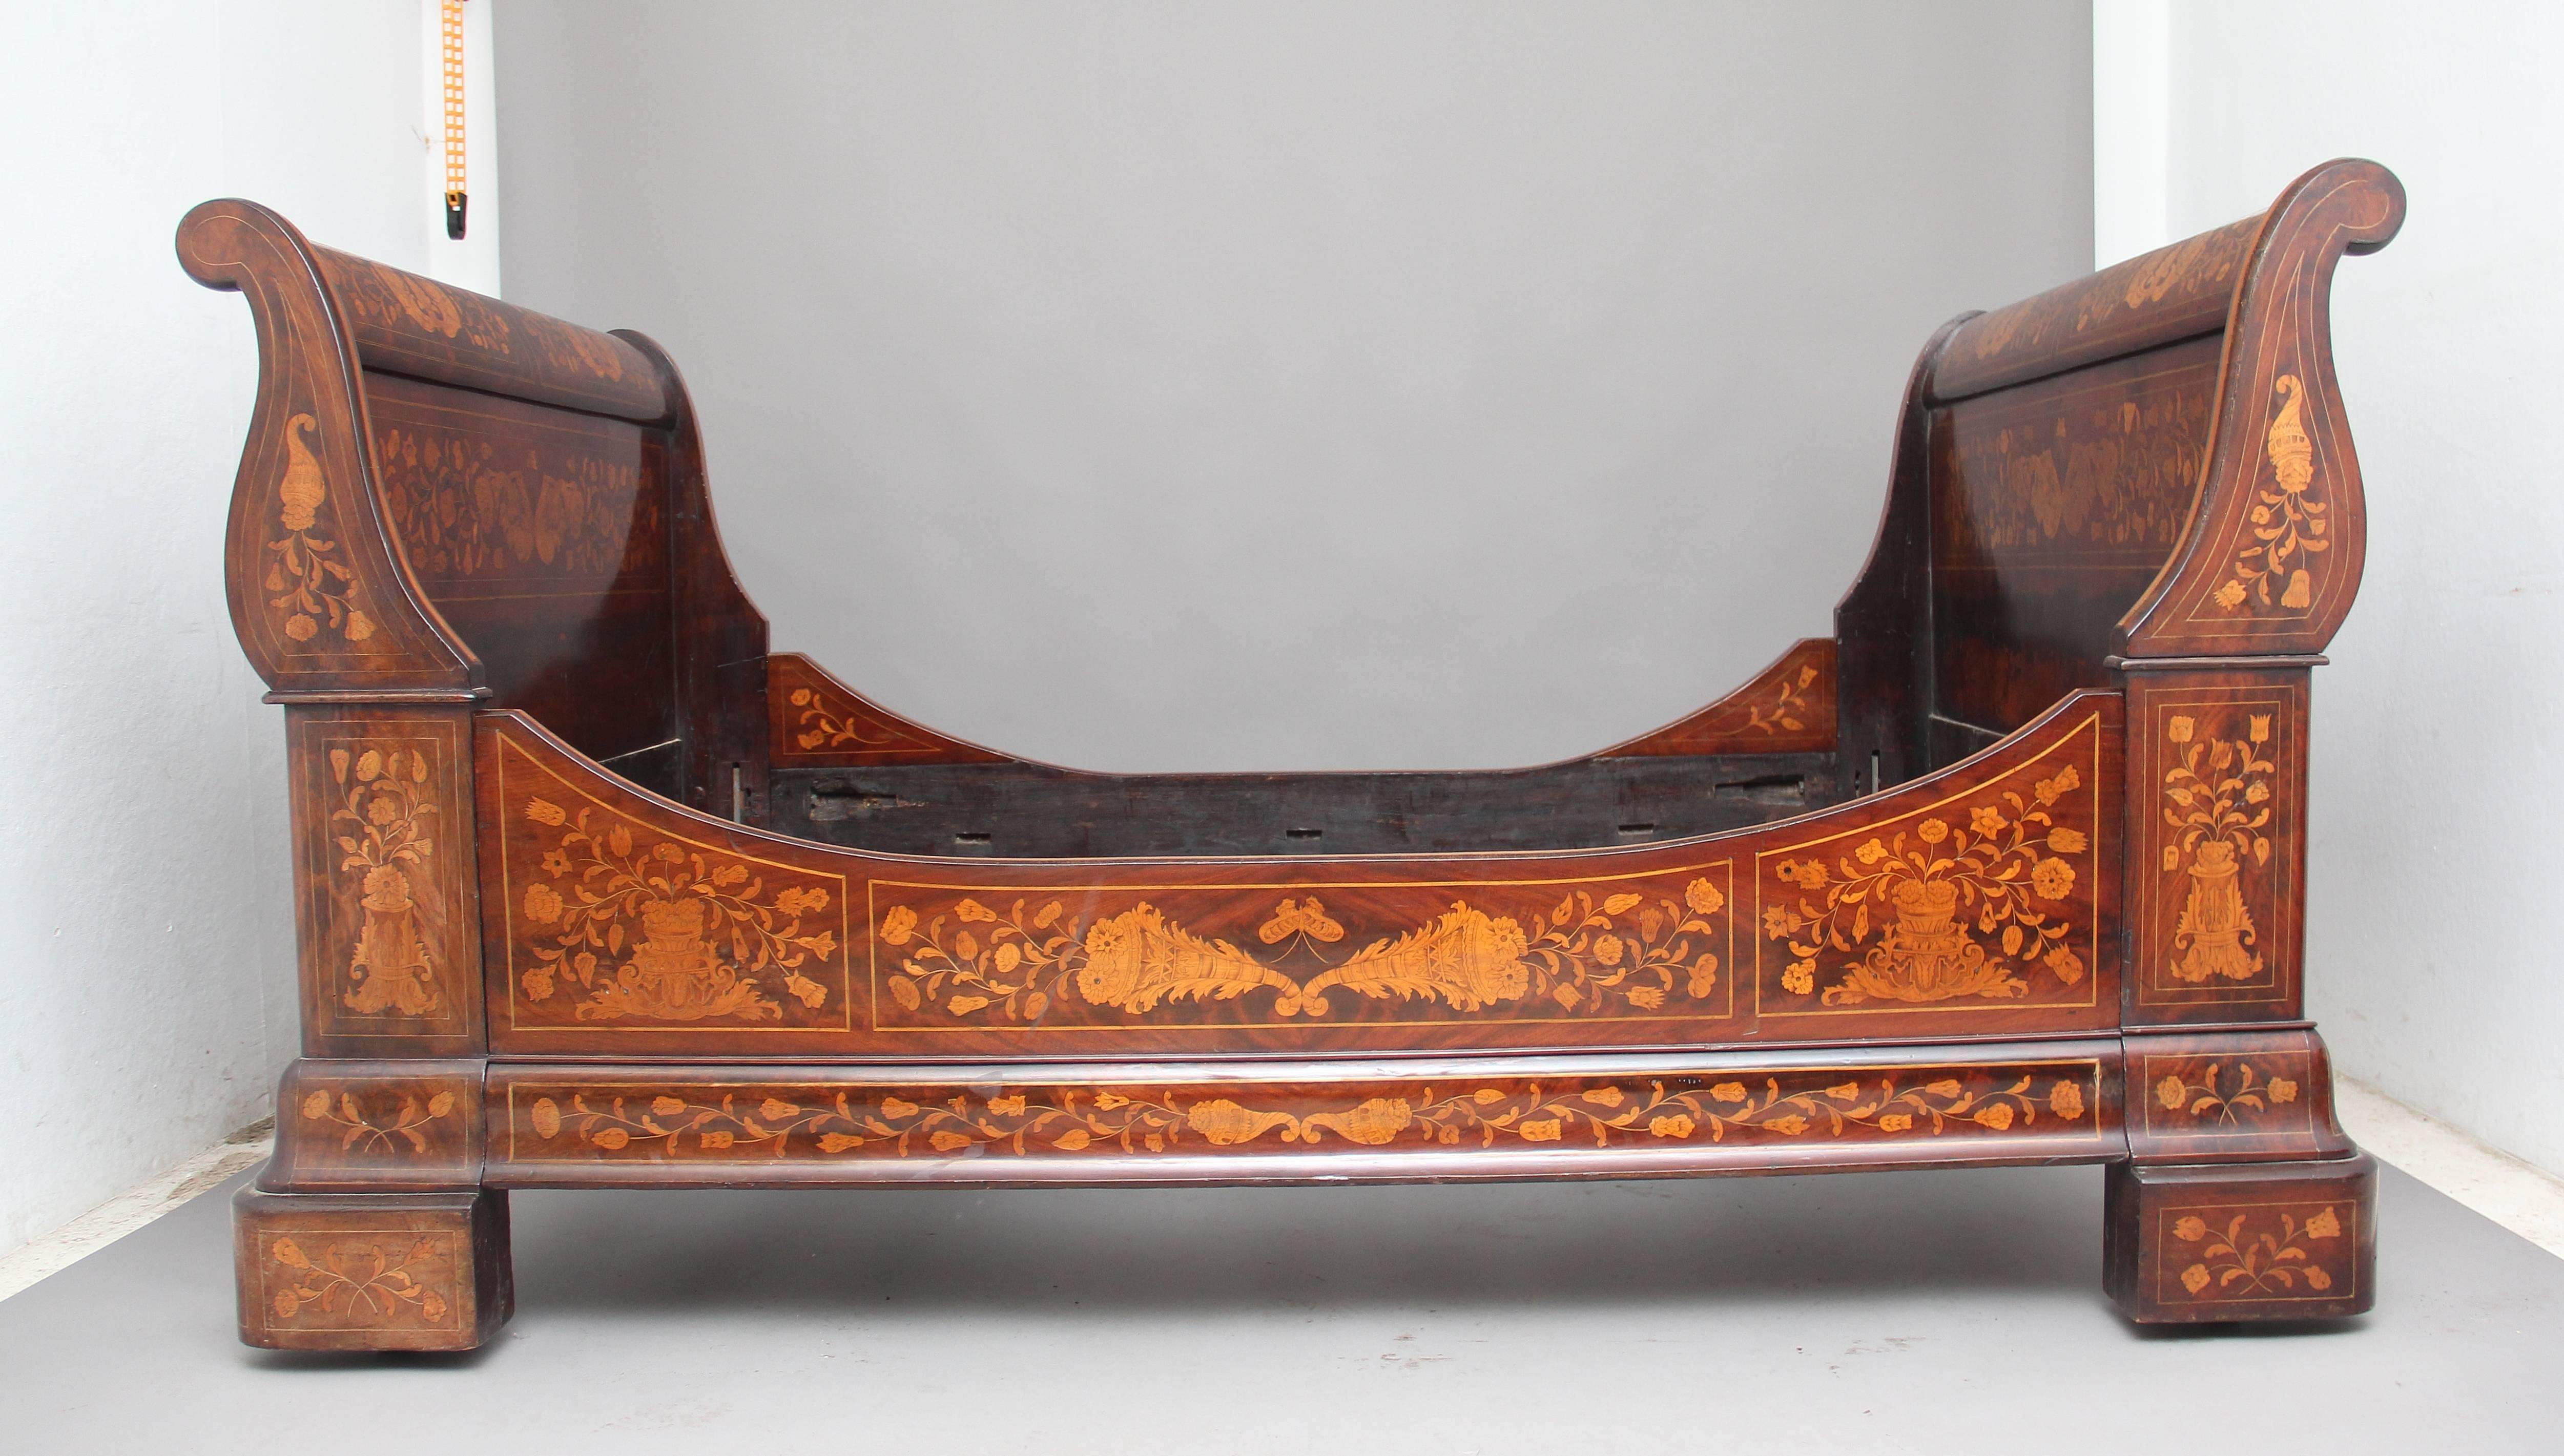 A superb quality early 19th century Dutch mahogany and marquetry sleigh bed, with scrolling head and footboards, profusely decorated all over, including the inside, with various floral marquetry, conforming stretchers, fantastic color and detail,